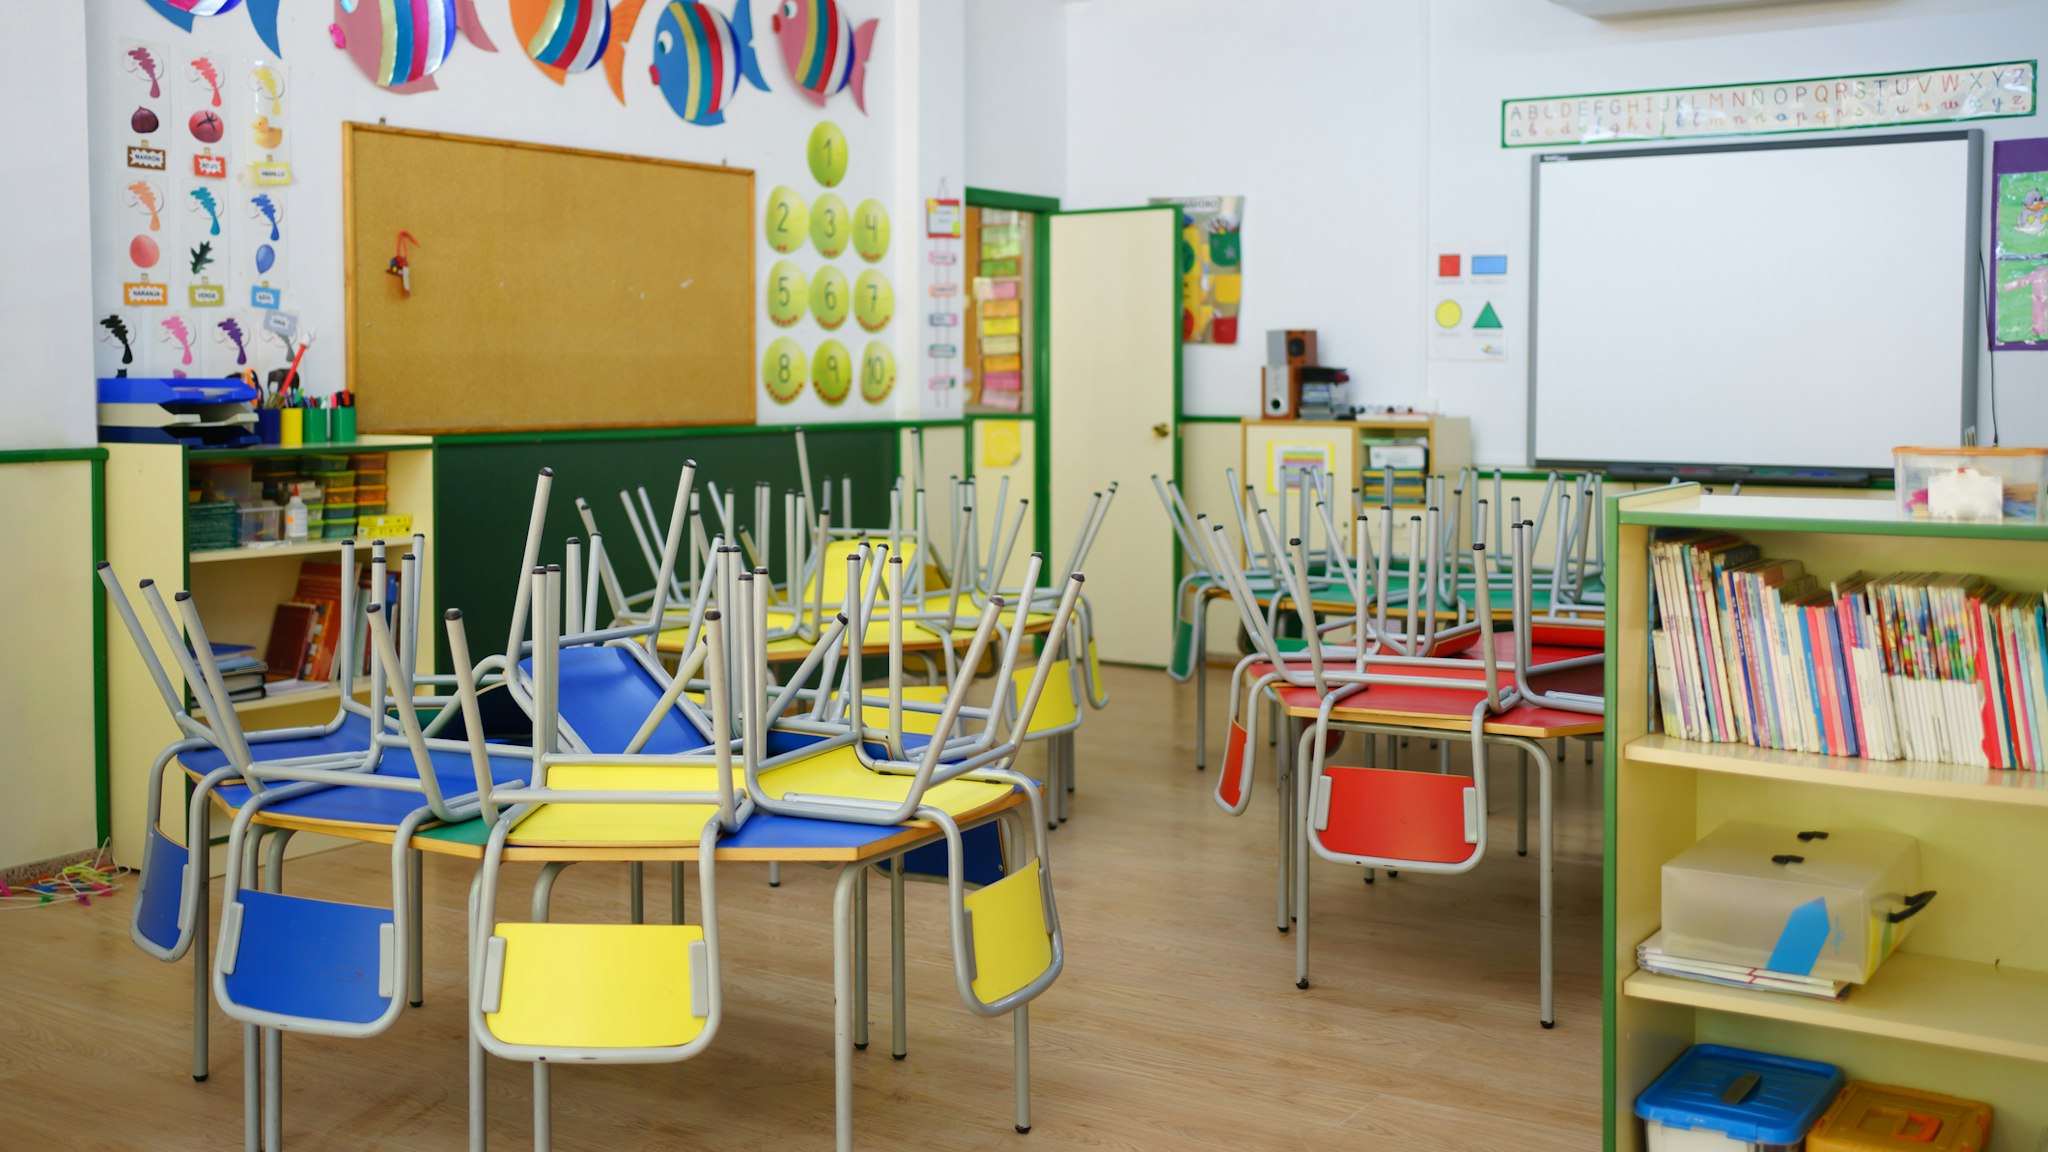 Wide view of a children's classroom at the school. Red, yellow and blue chairs arranged on the tables, white board and other school equipment.